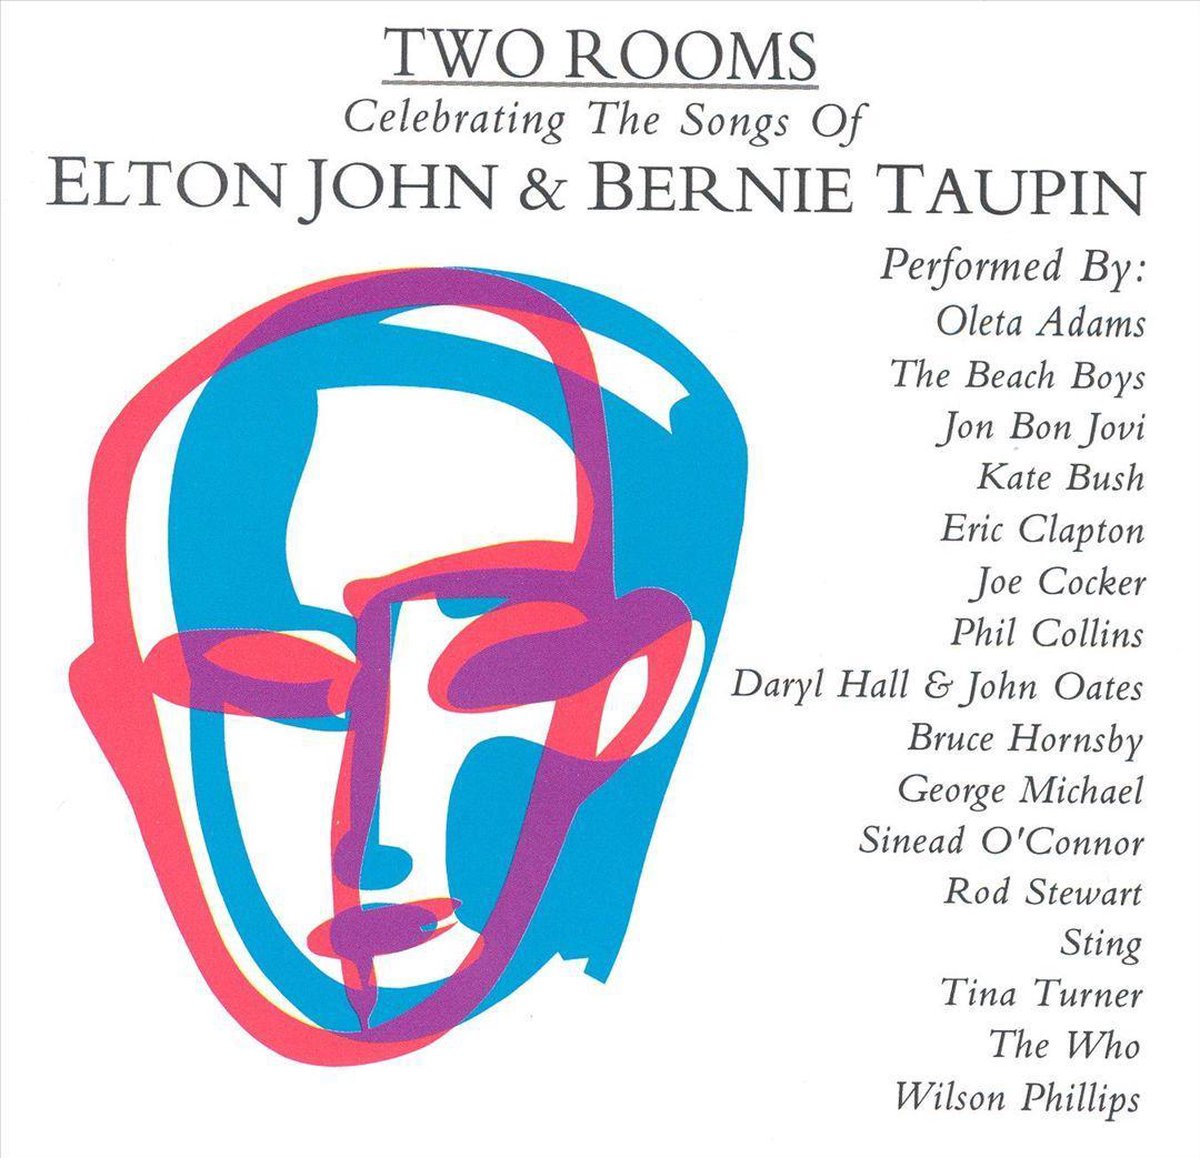 Two Rooms: Songs Of Elton John & Bernie Taupin - various artists